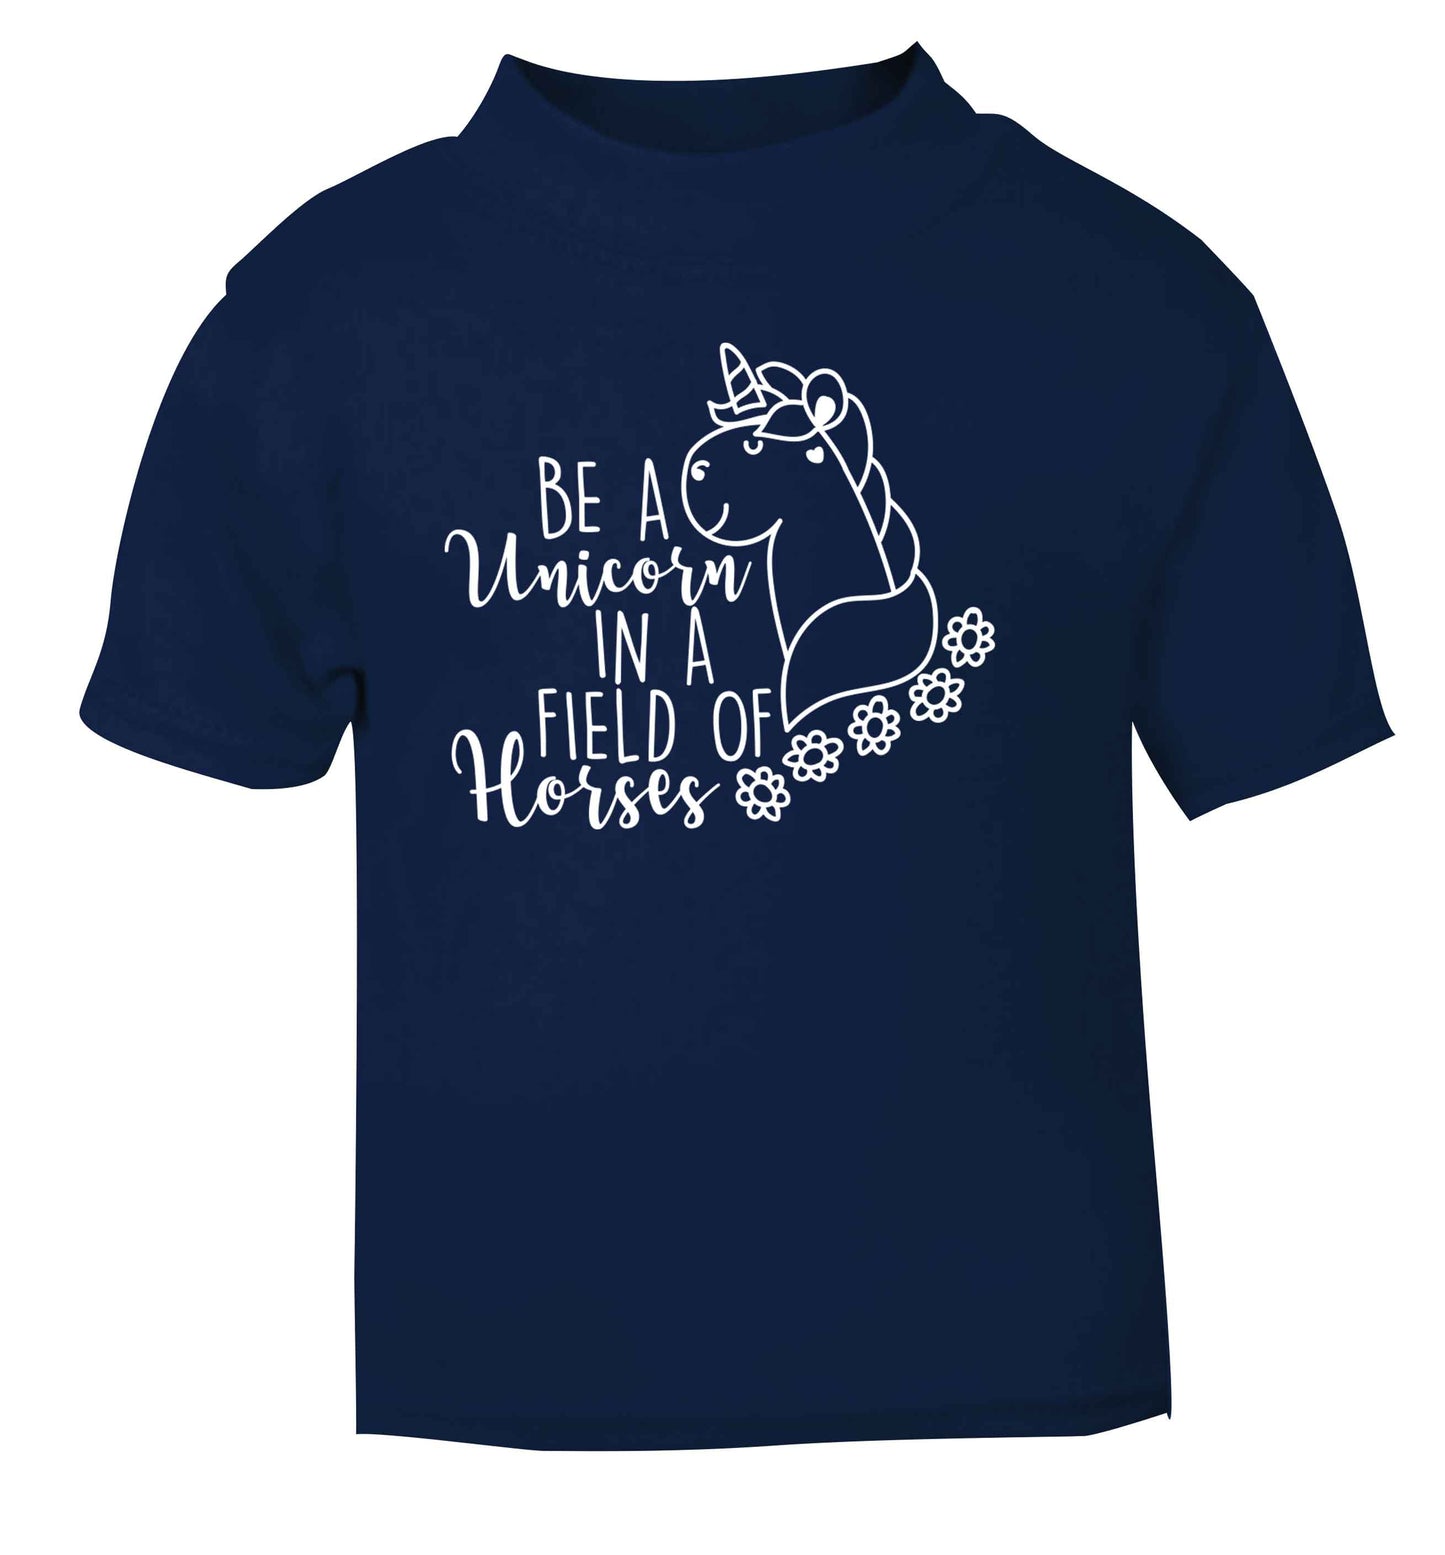 Be a unicorn in a field of horses navy Baby Toddler Tshirt 2 Years